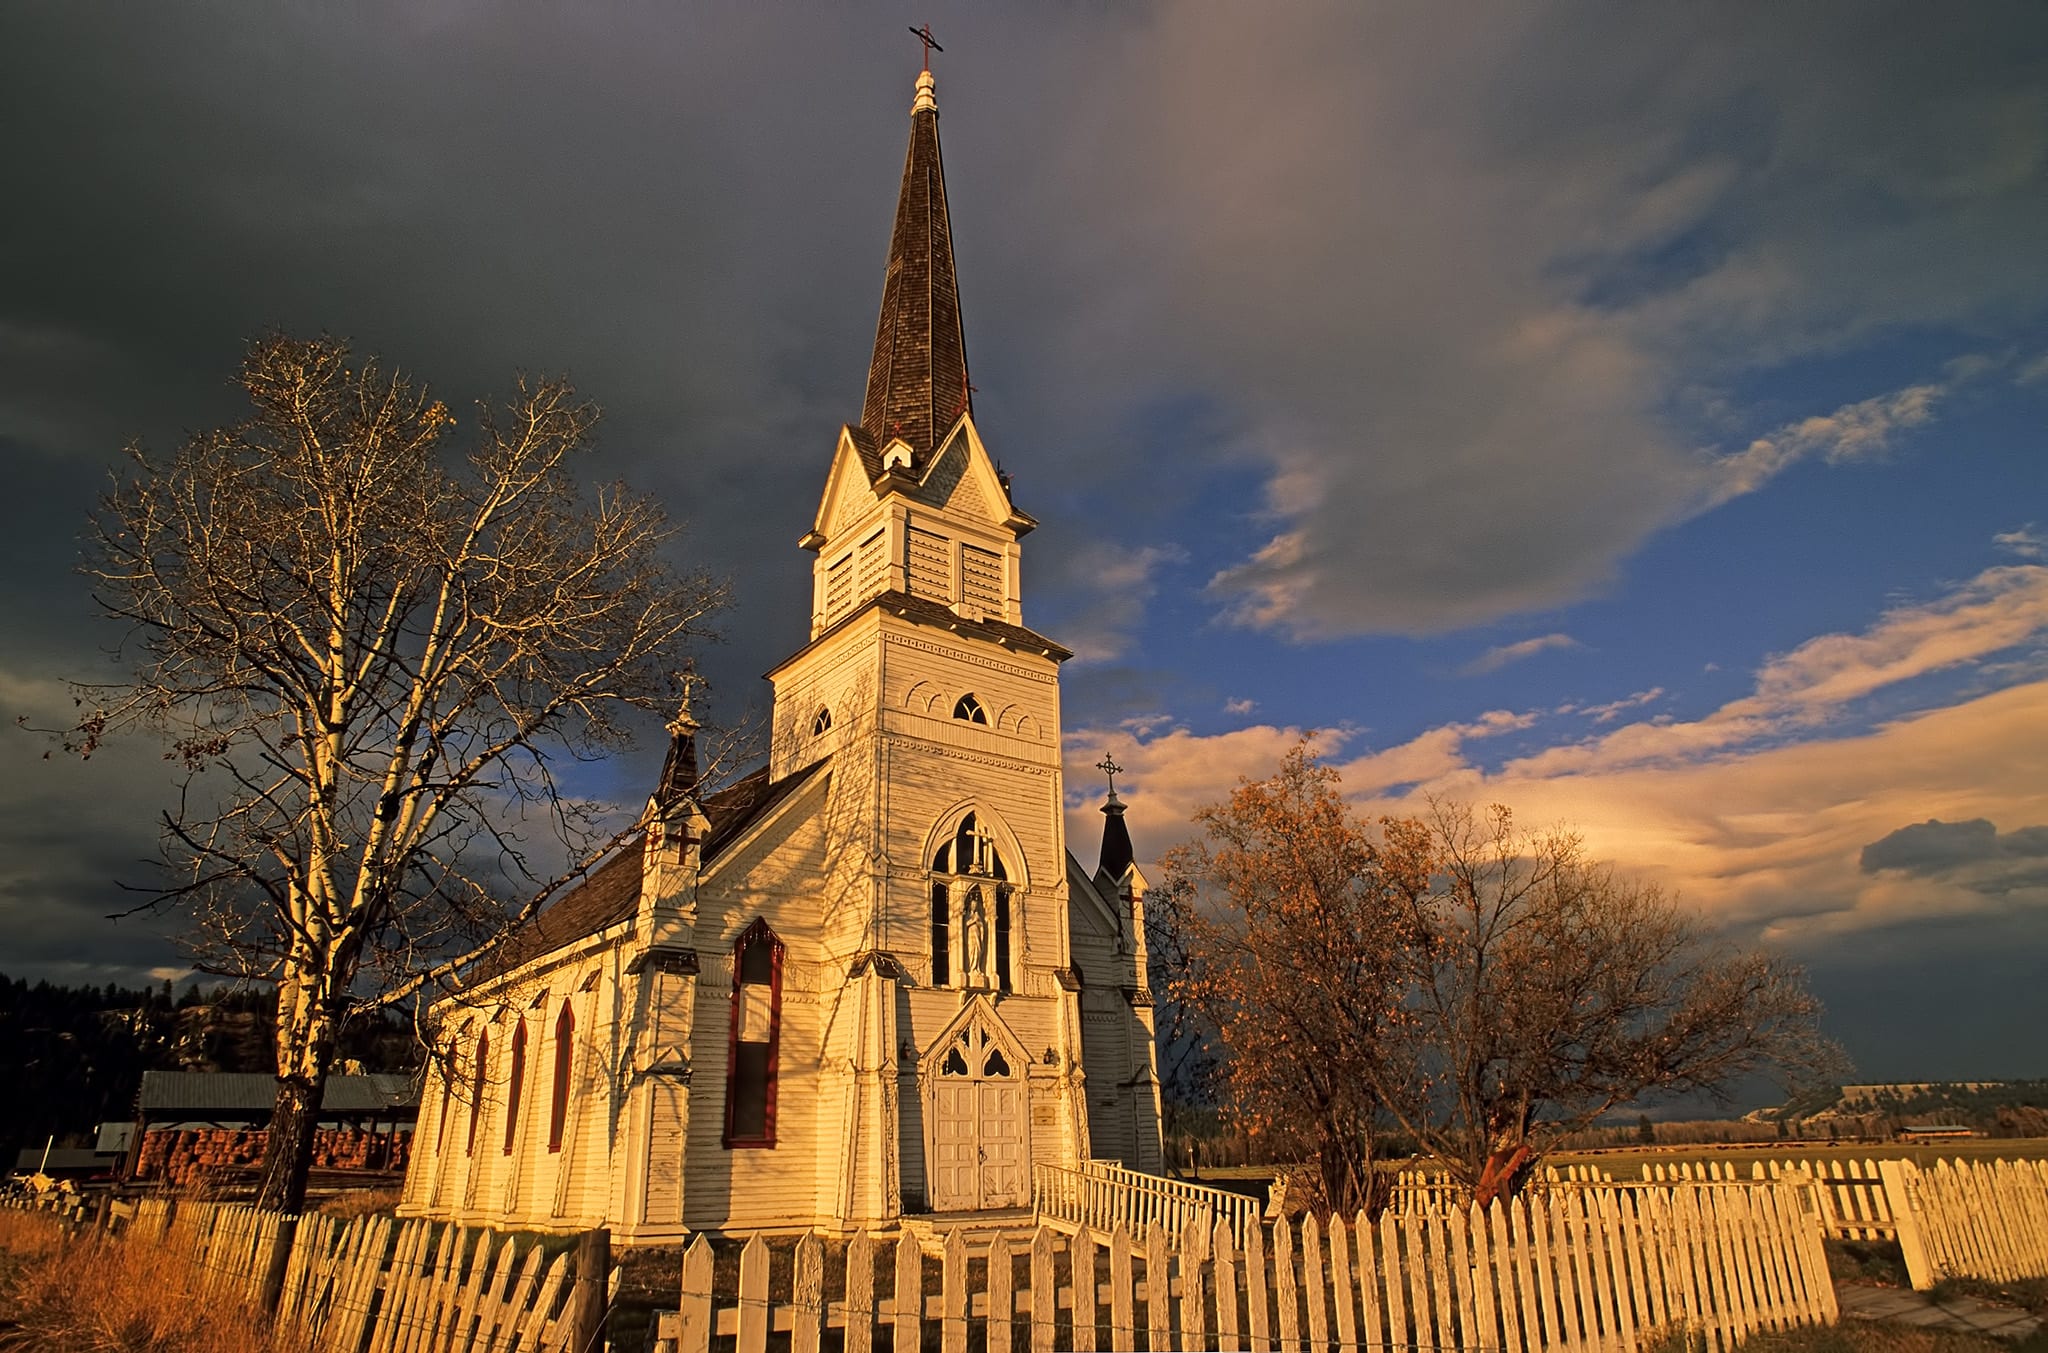 The St.Eugene Church, on the St. Mary’s Band Reserve, a Victorian-era wooden church dating from the late 1800s. Near Cranbrook, British Columbia, Canada.